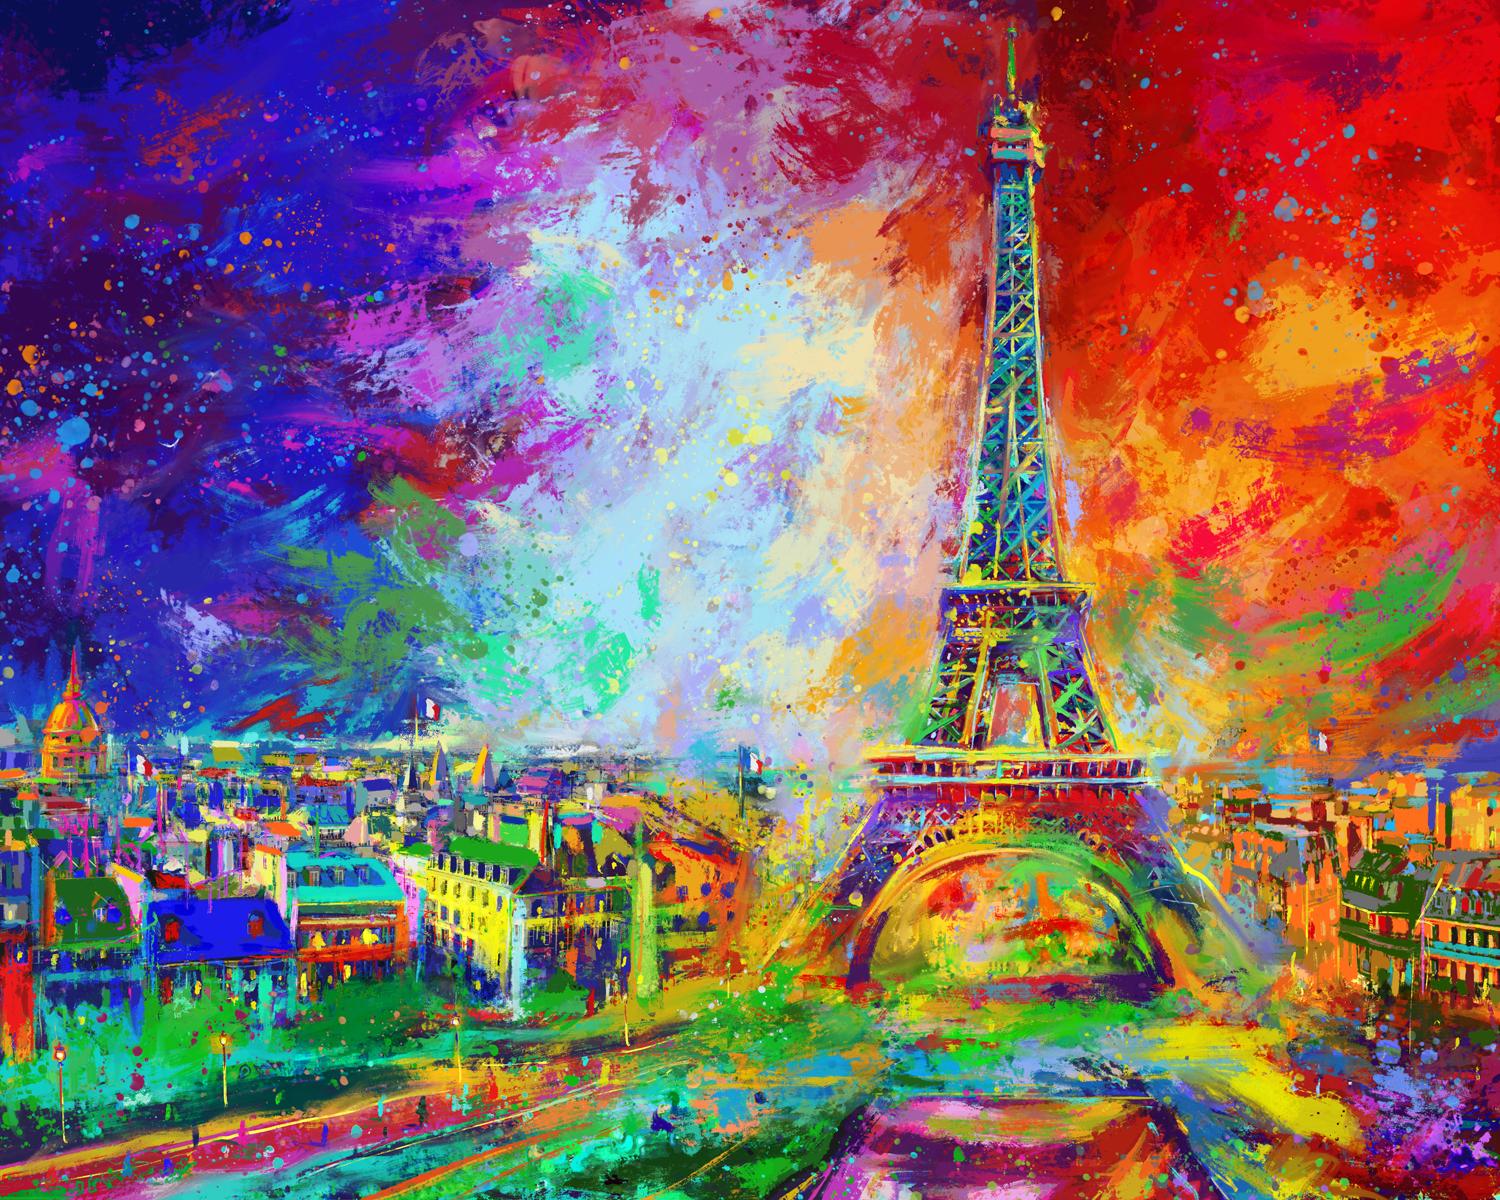 Eiffel Tower - Original Oil on canvas painting by Blend Cota